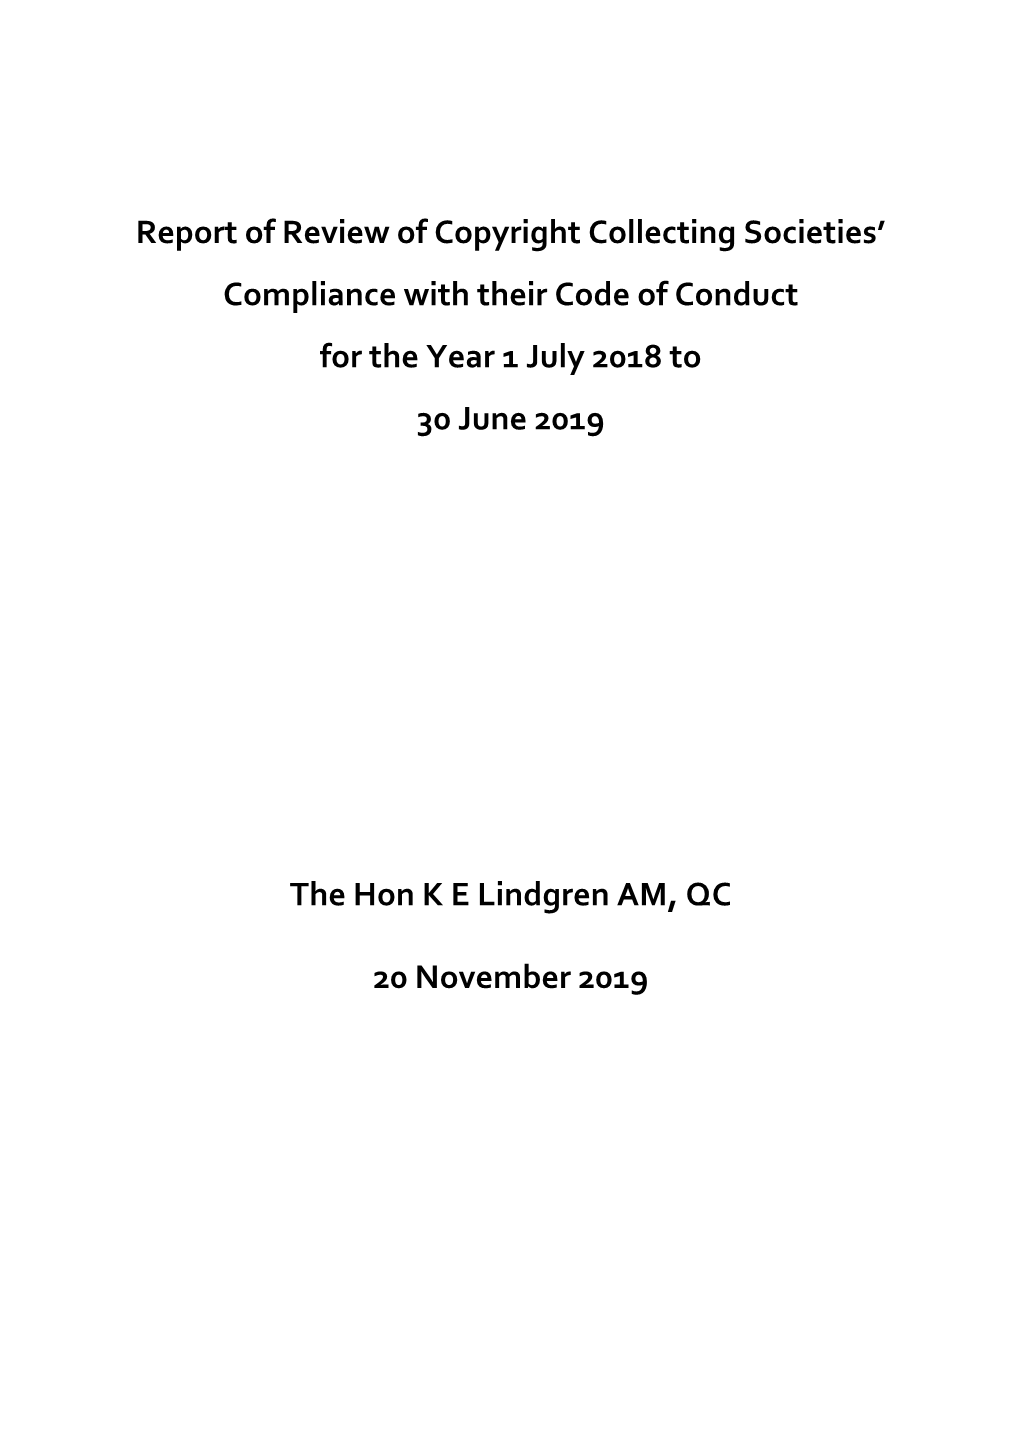 Code Reviewer's Annual Compliance Report 2019